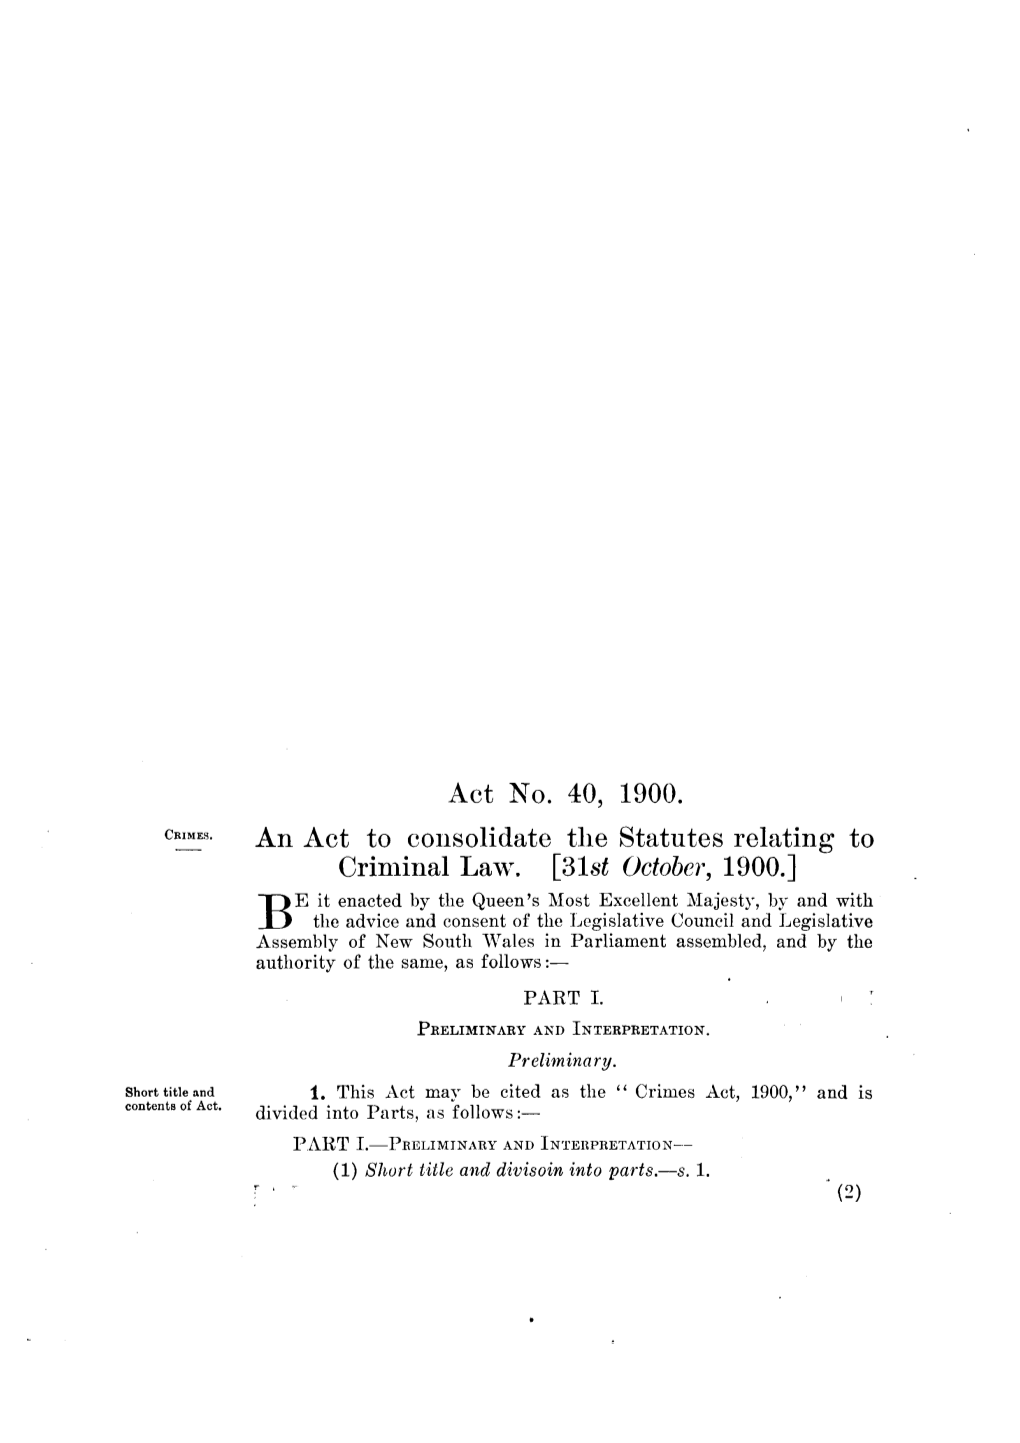 Act No. 40, 1900. an Act to Consolidate the Statutes Relating to Criminal Law